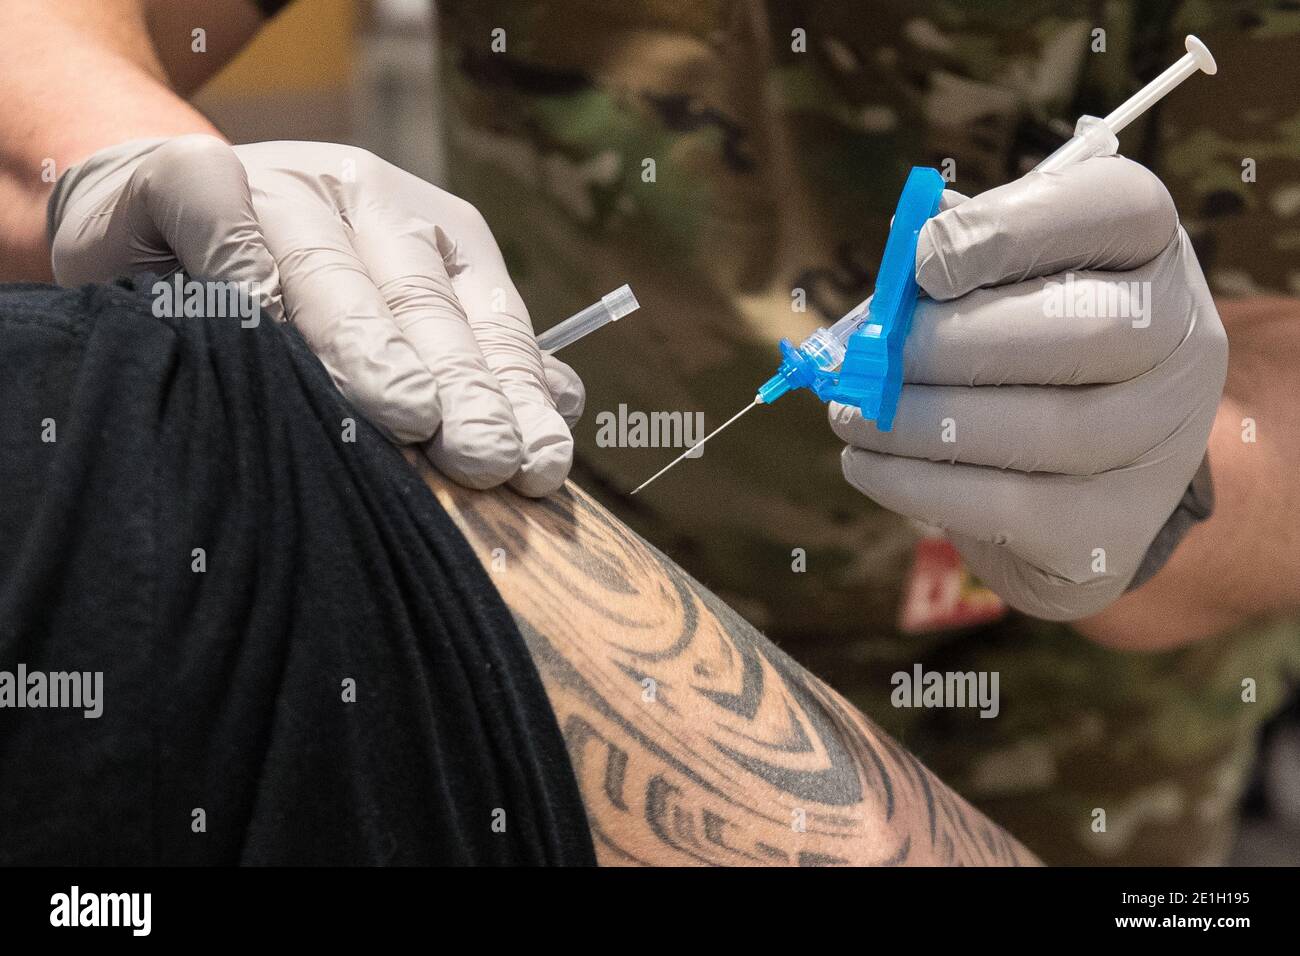 Pfizer-BioNTech COVID-19 vaccinations began Wednesday, December 16, 2020, at Madigan Army Medical Center on Joint Base Lewis-McChord in Tacoma, Washington. (USA) Stock Photo